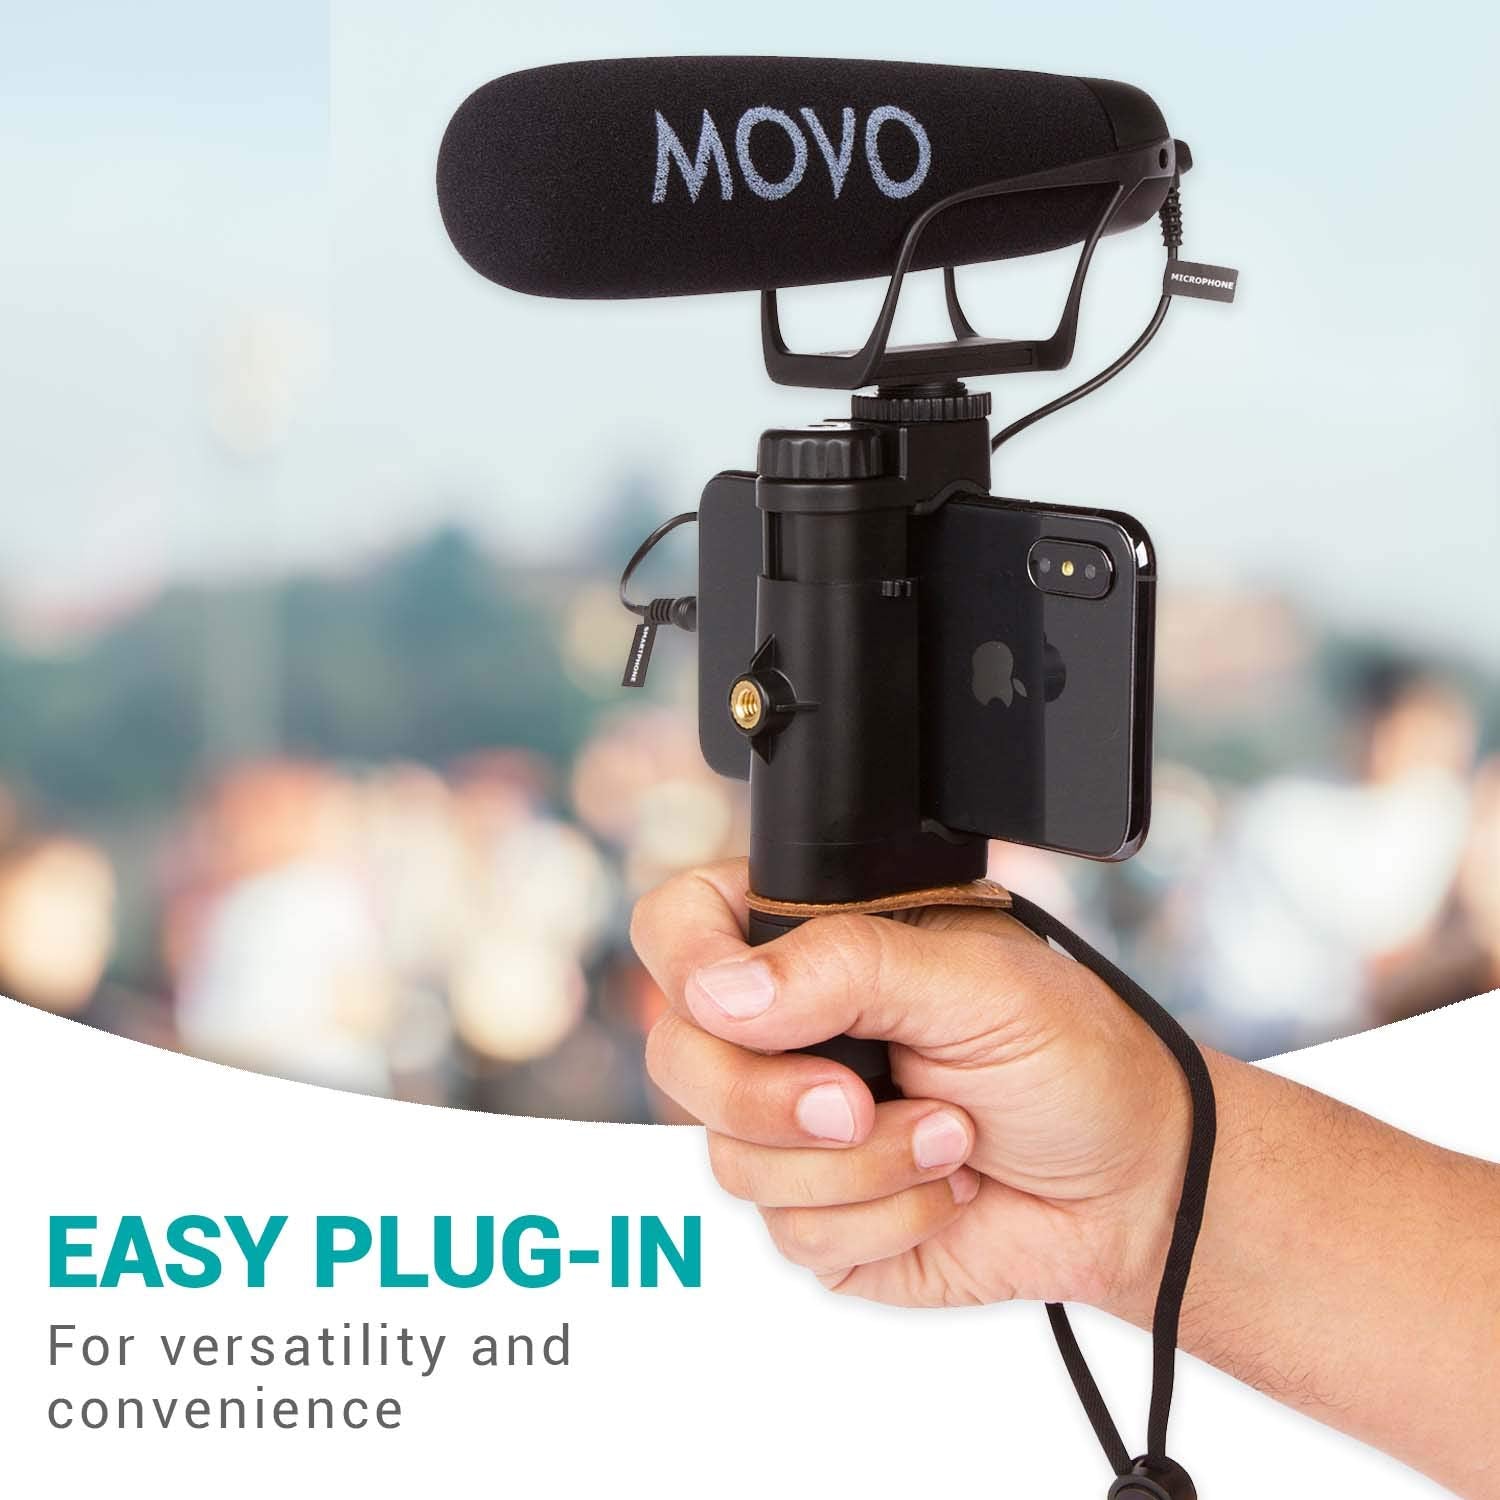 Movo VXR2021 Universal Supercardioid Condenser Shotgun Microphone Compatible with iPhone, Android Smartphones and Tablets. DSLR, Mirrorless Cameras, Camcorders, Recorders, Laptops, Computers and More  - Like New